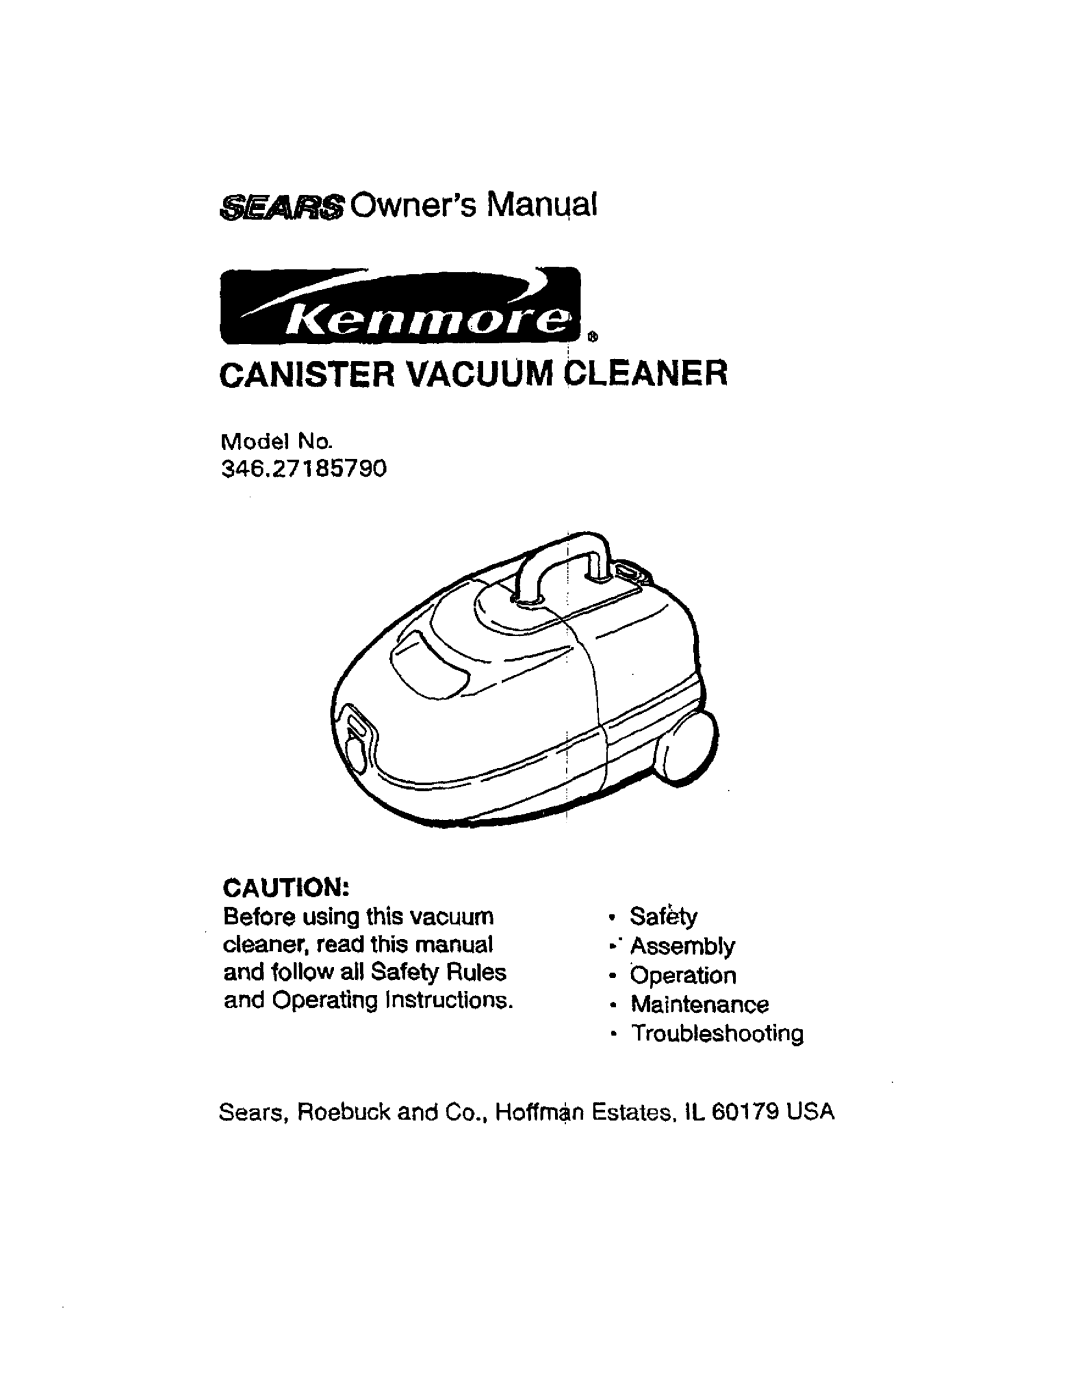 Kenmore owner manual Canister Vacuum Cleaner, safety, 346.27185790 